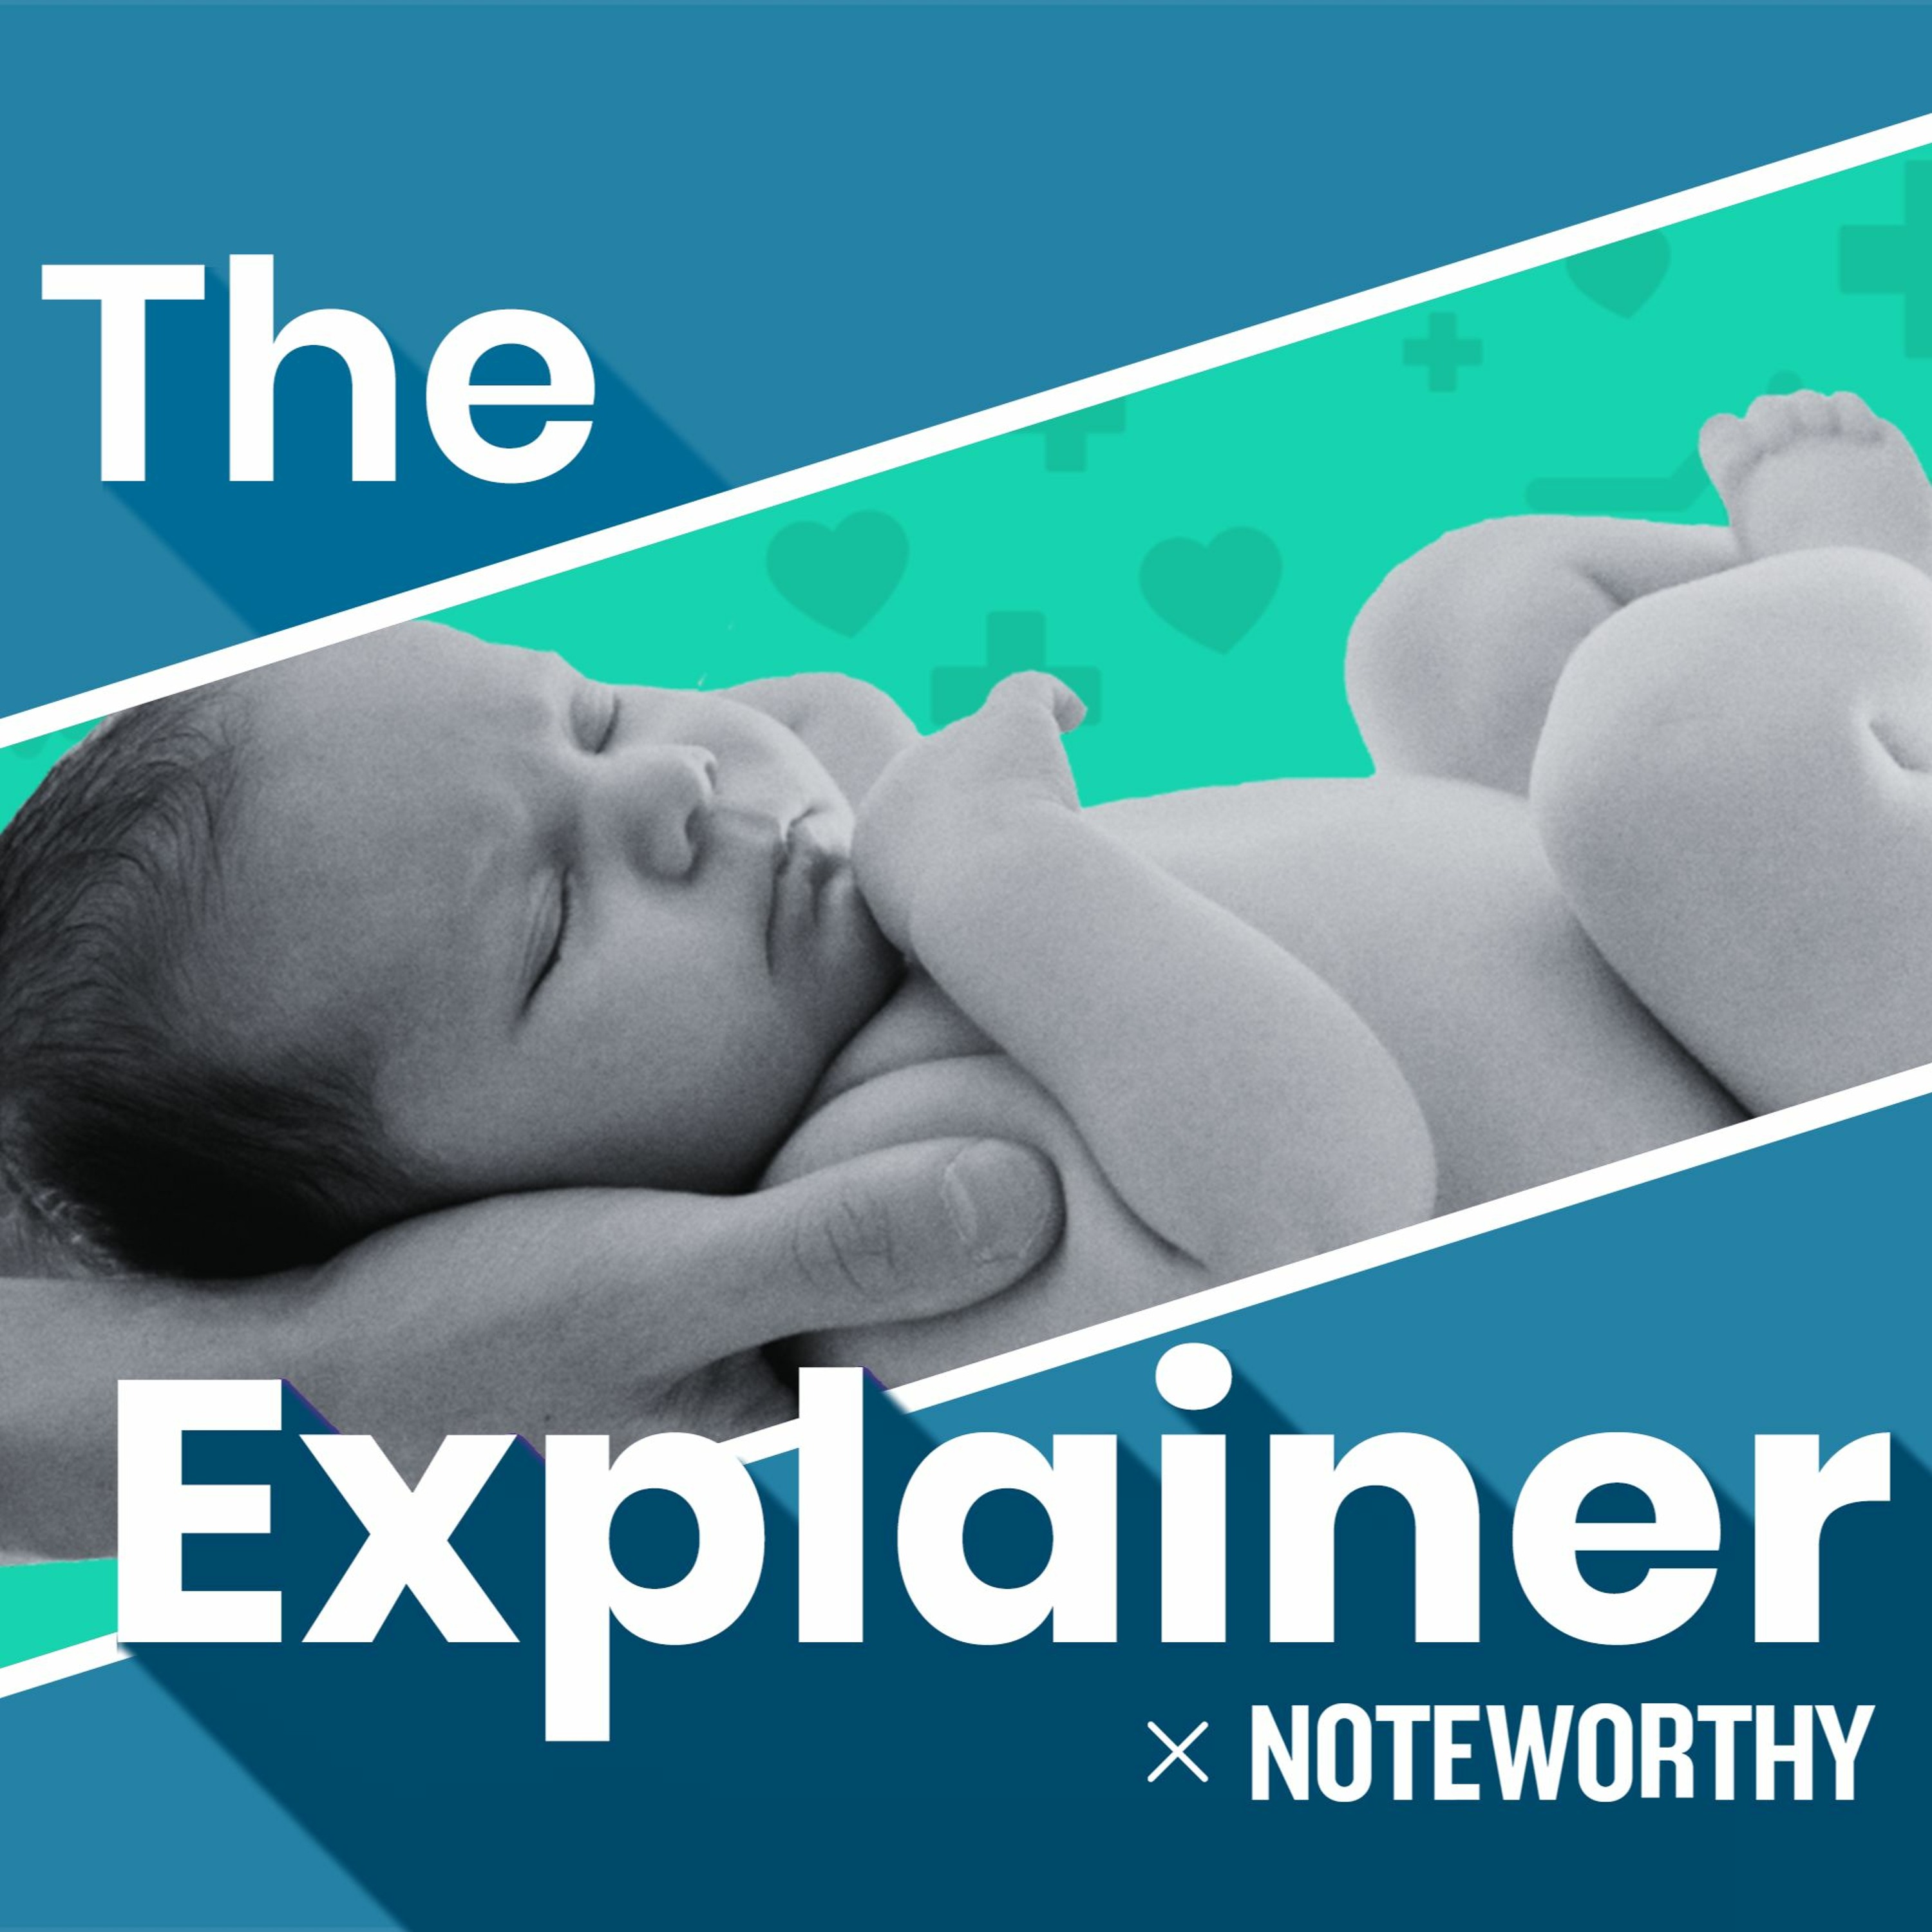 By Noteworthy: Will home births ever be the norm in Ireland?